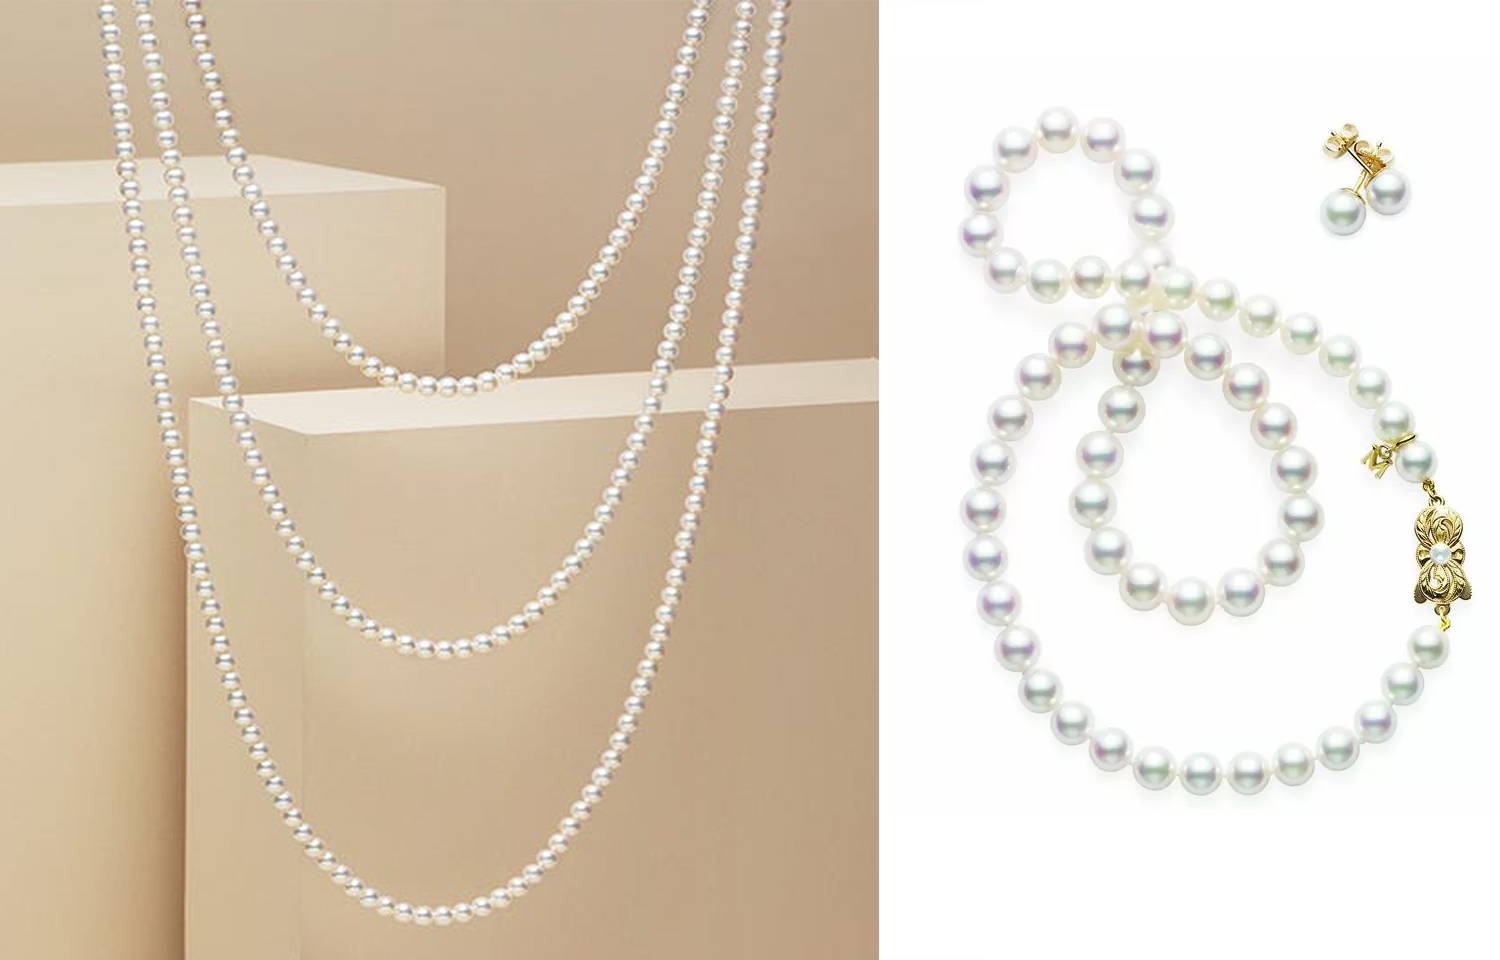 Mikimoto Pearl Necklaces on Beige Background